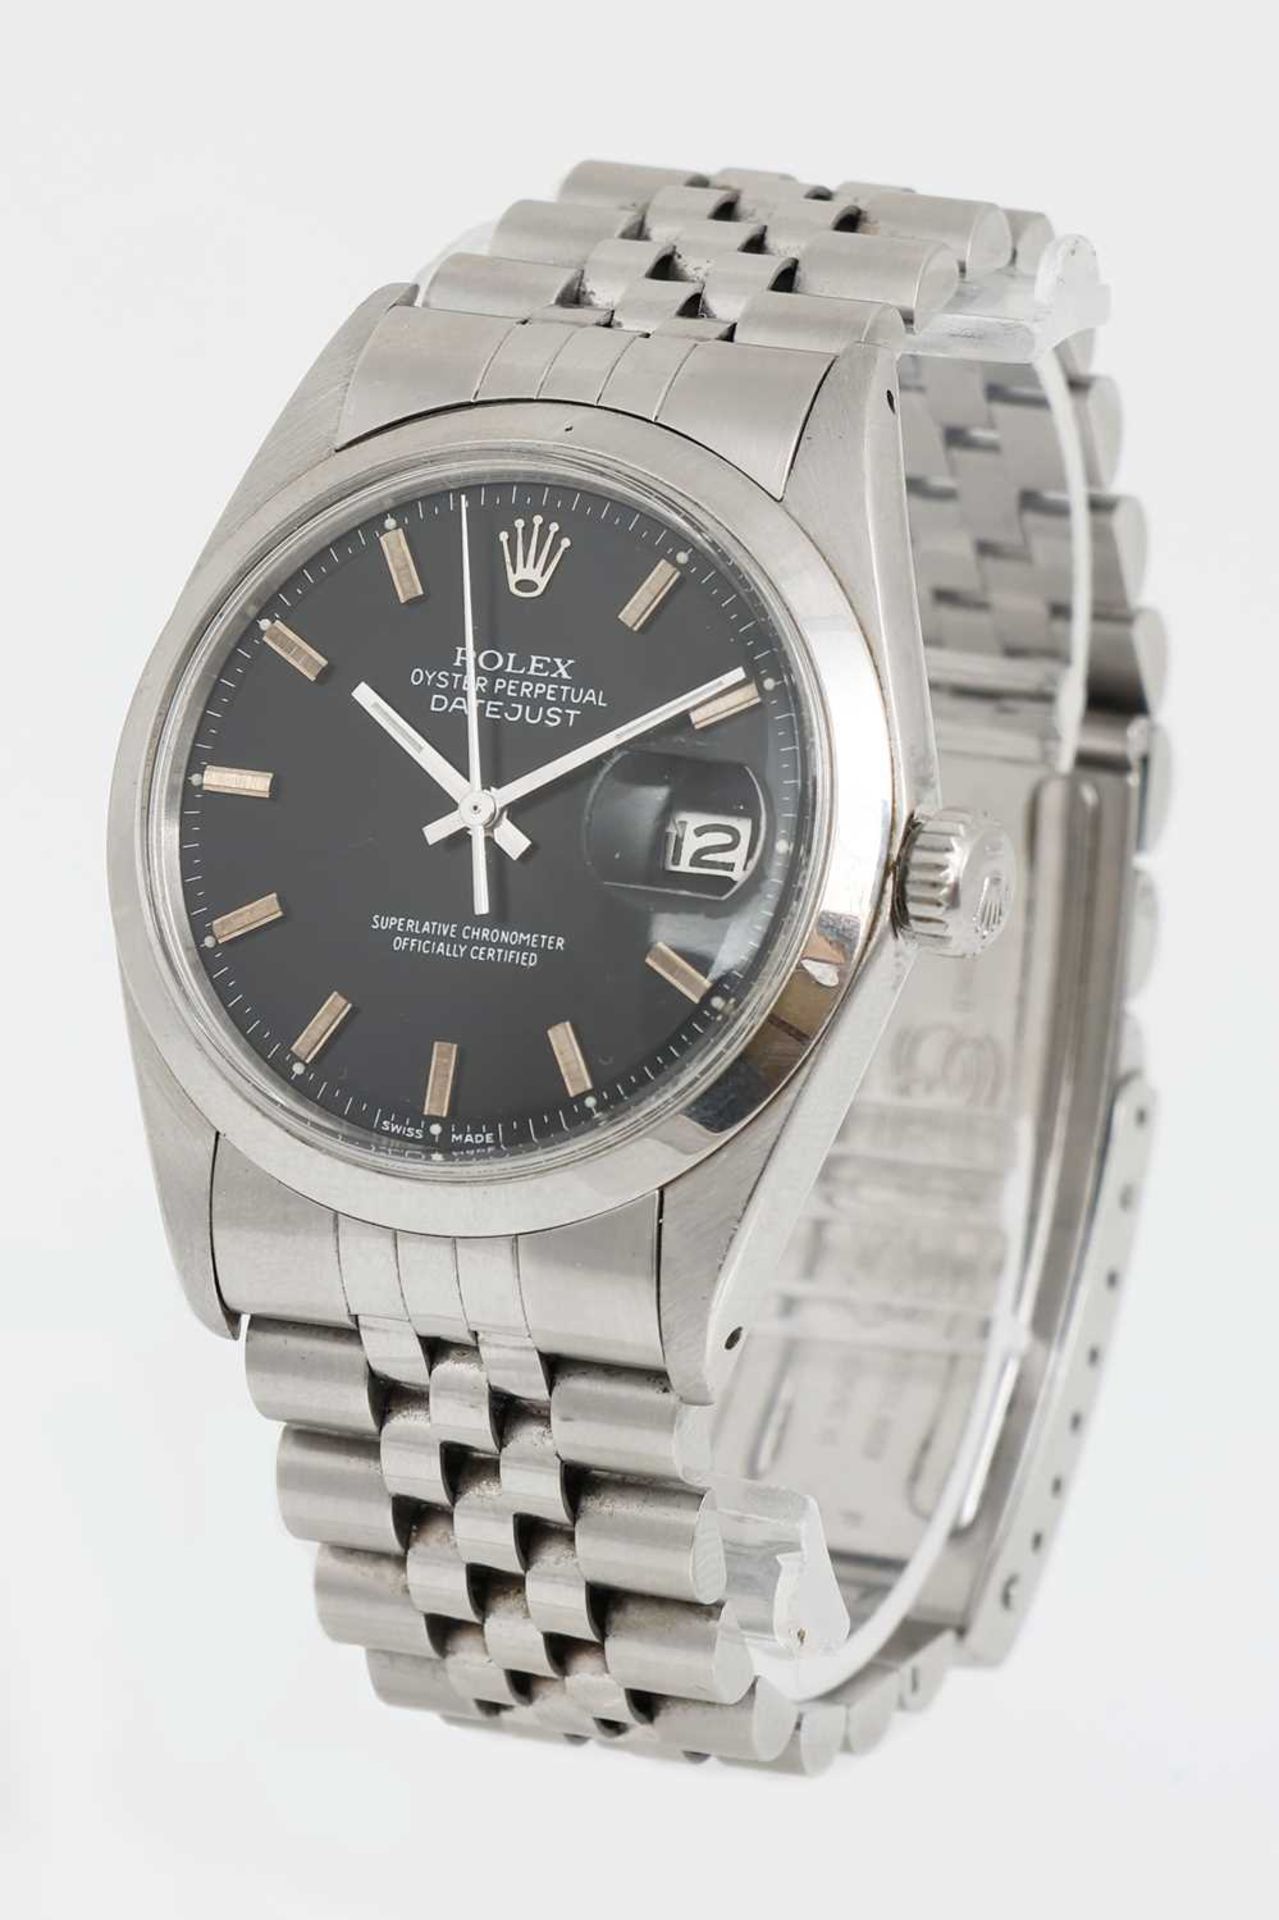 ROLEX Oyster Perpetual, Datejust